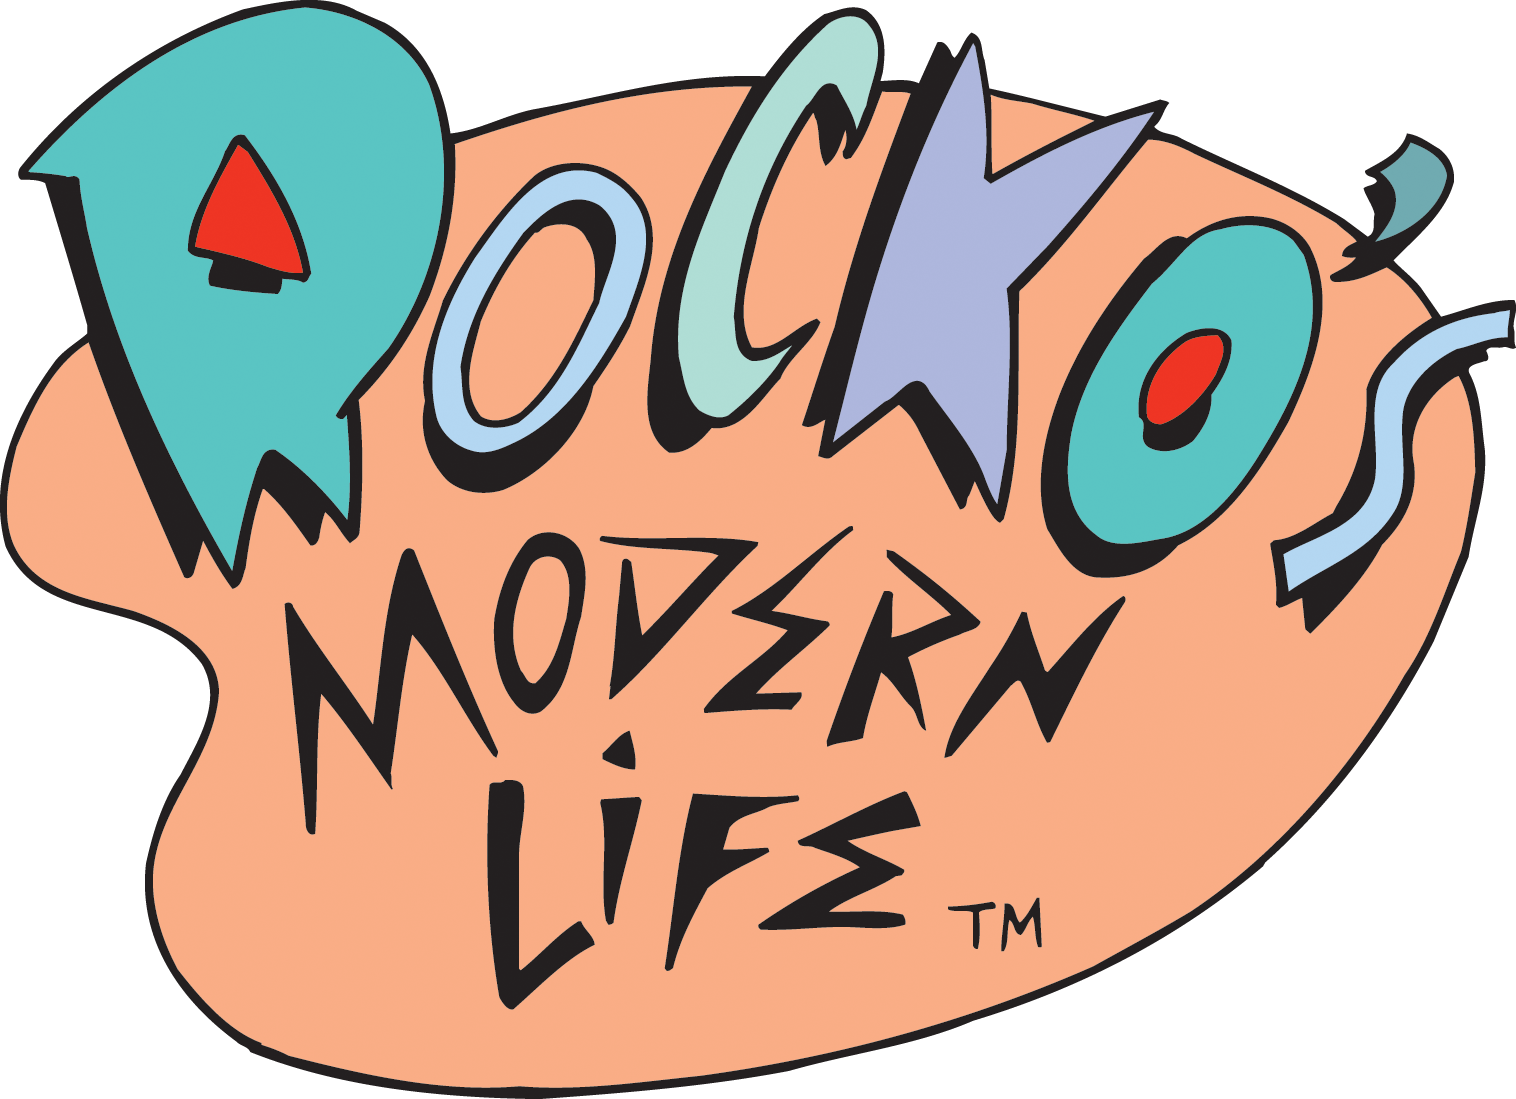 Image Is Not Available - Rocko's Modern Life (1516x1099)